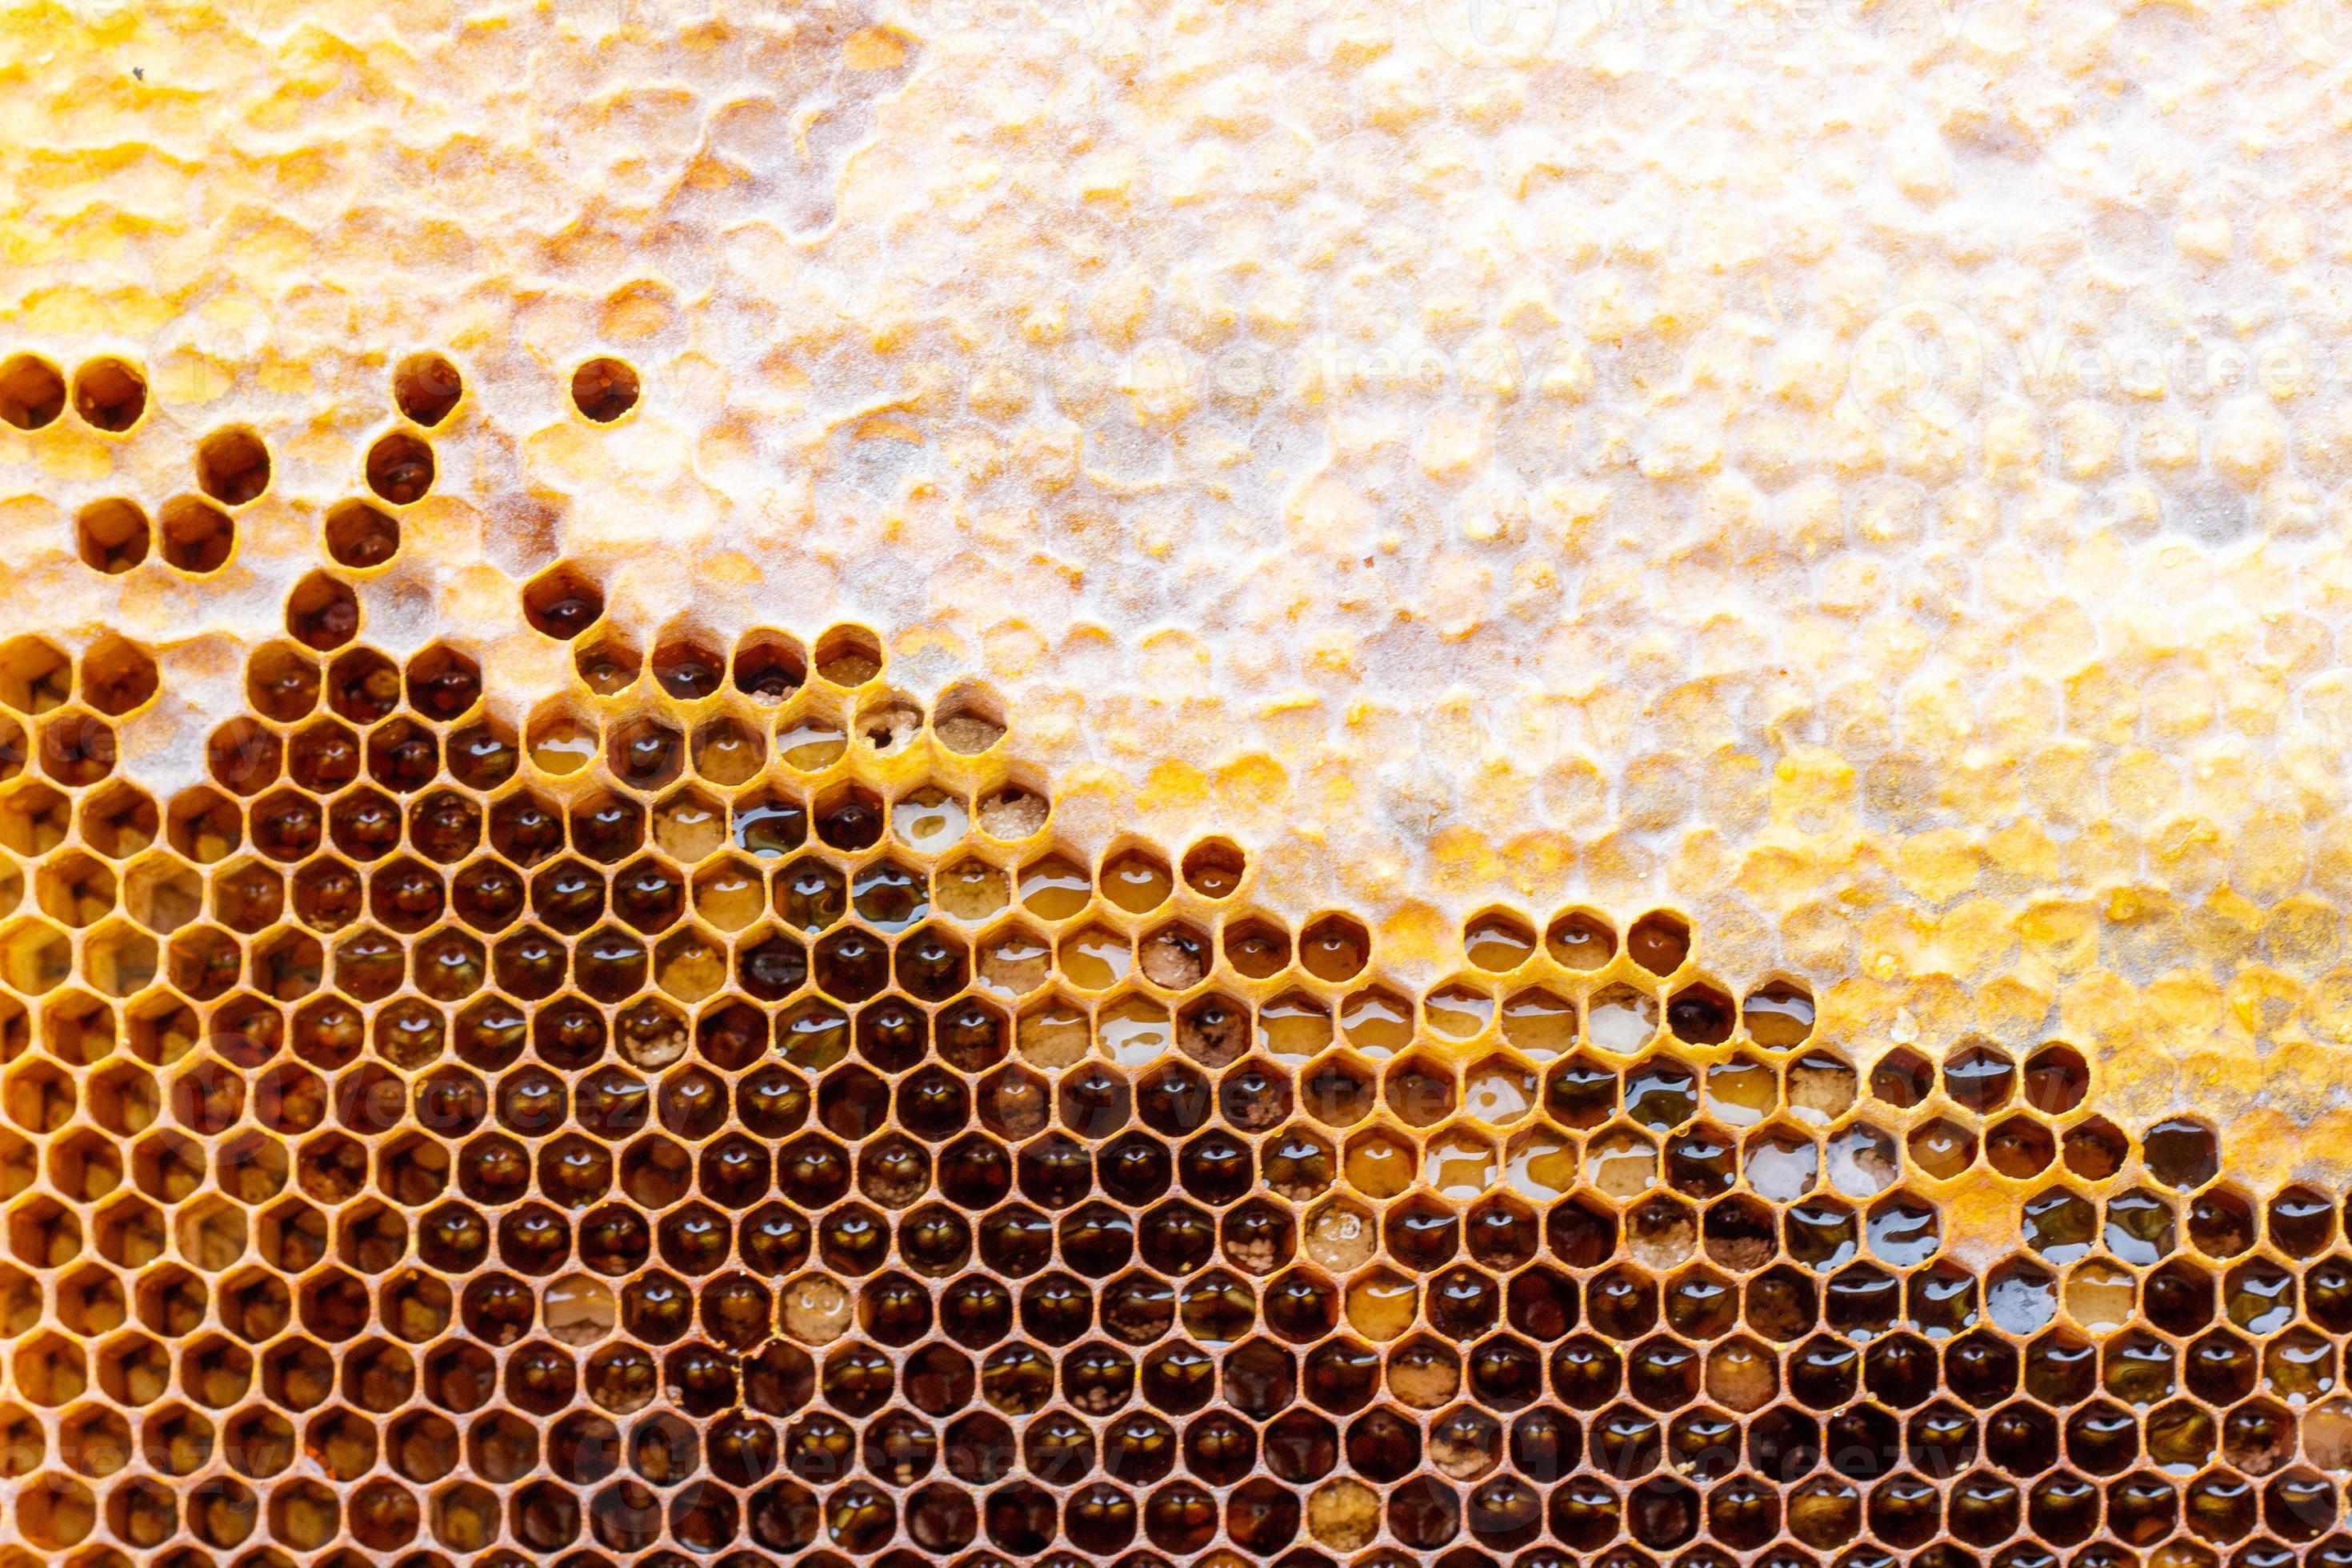 Uncapped honeycomb. Close-up of honeycomb from a honey bee